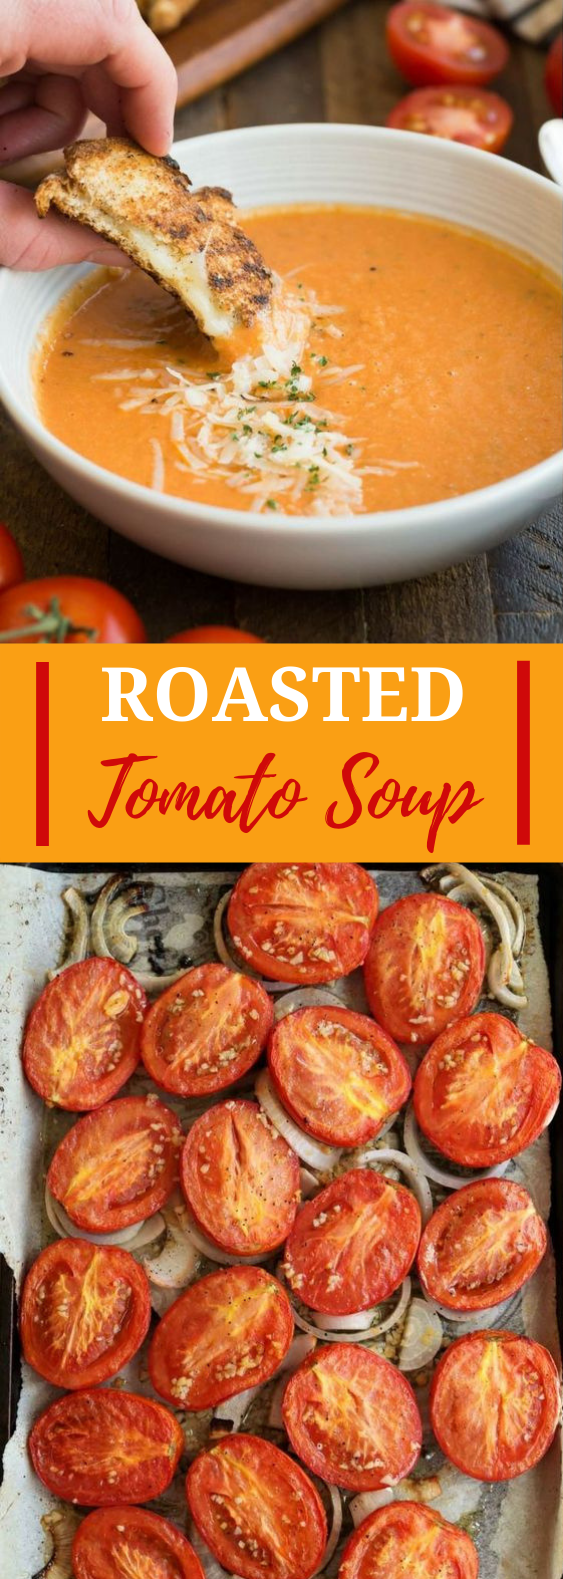 EASY ROASTED TOMATO SOUP RECIPE #Vegetarian #Meal